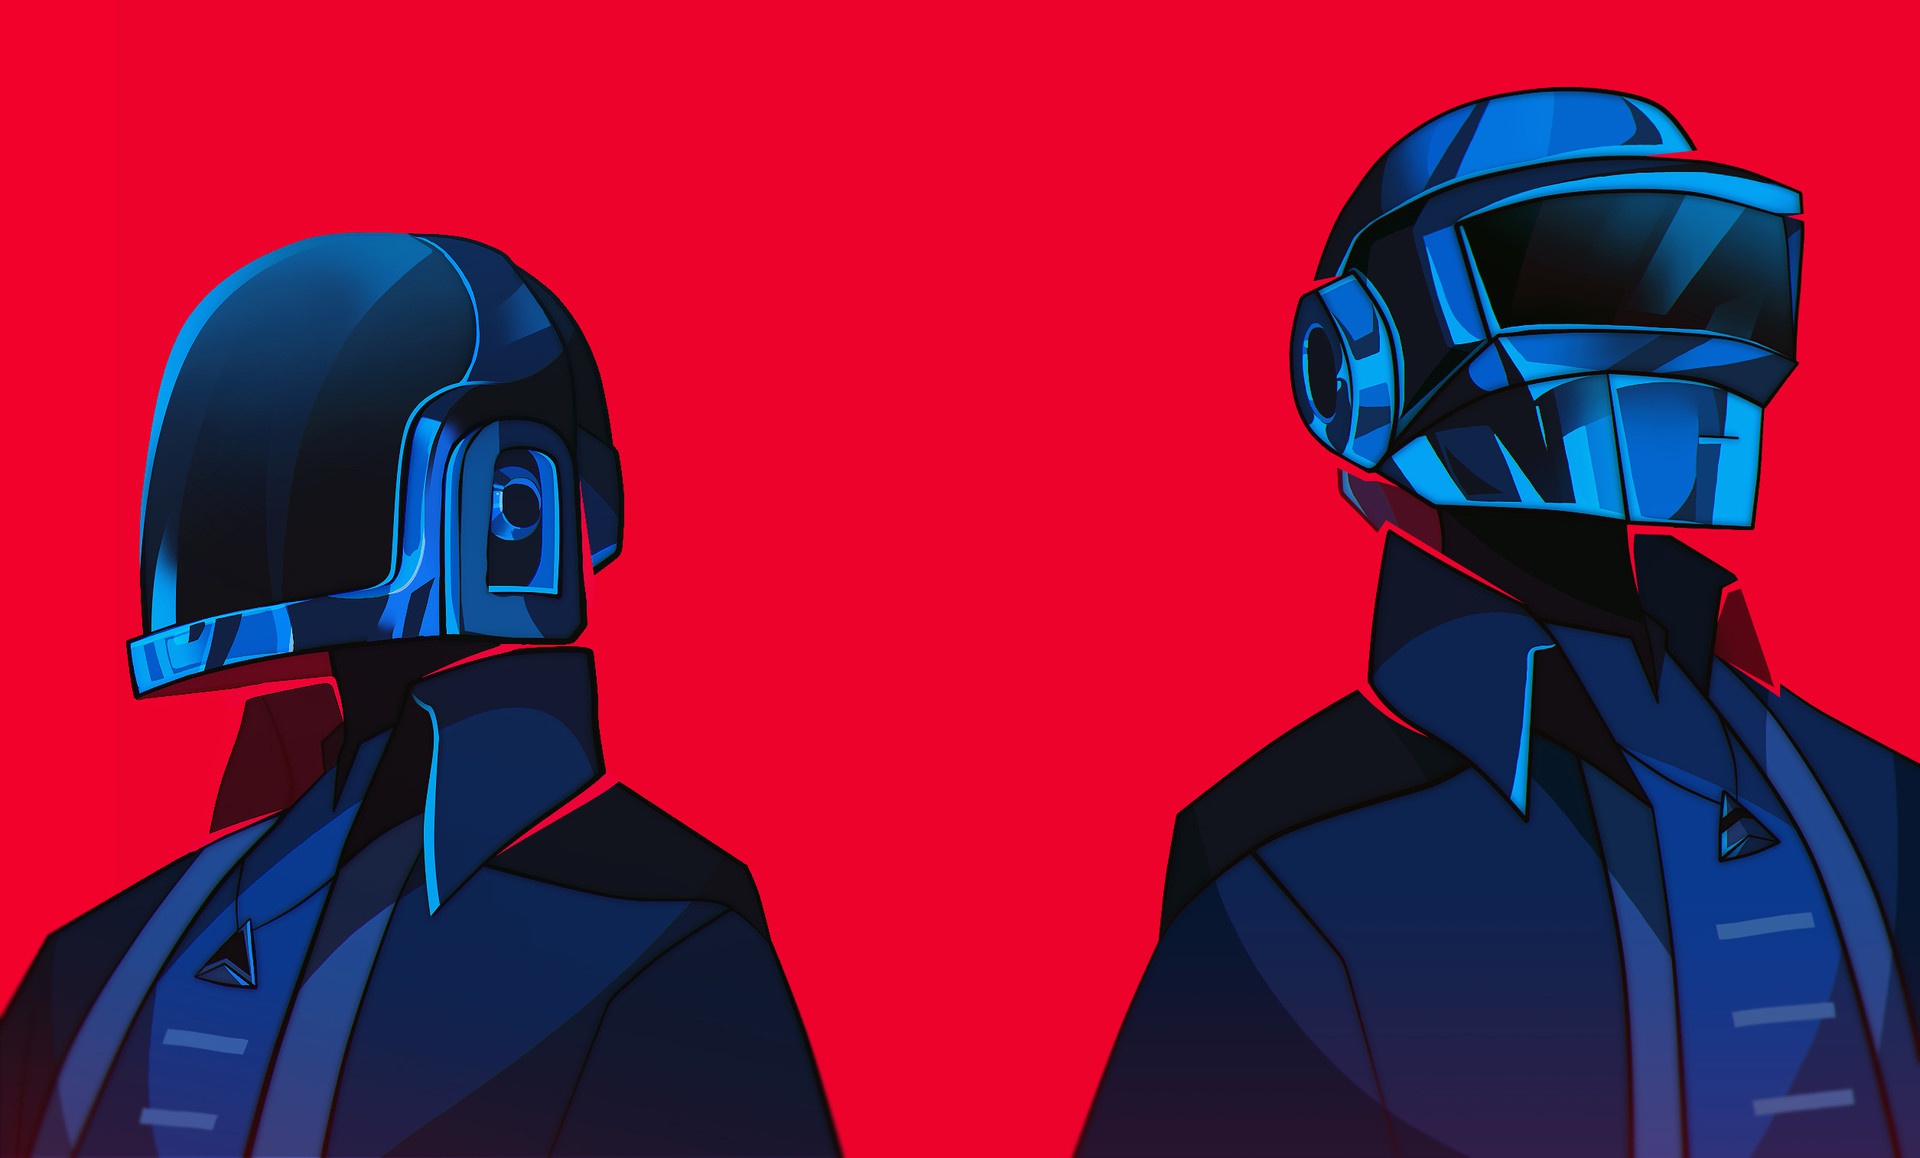 General 1920x1158 music artwork red background electronic music simple background helmet musician Daft Punk